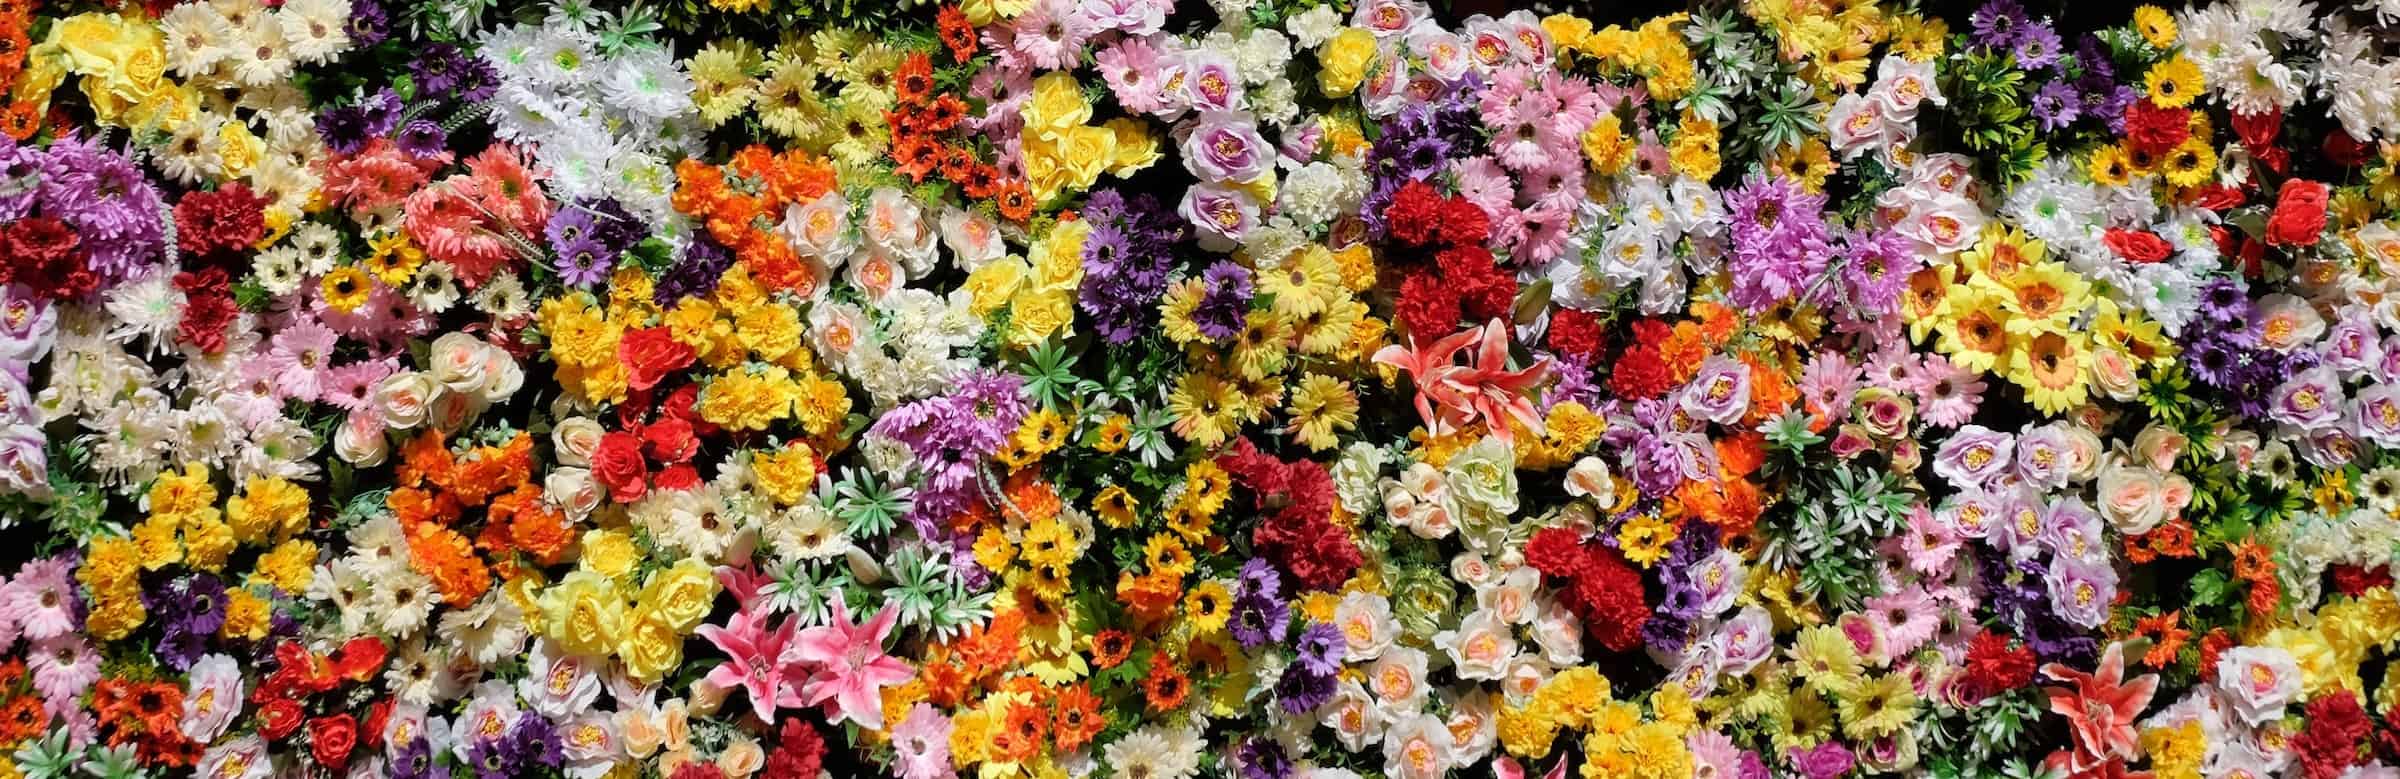 Flowers category background